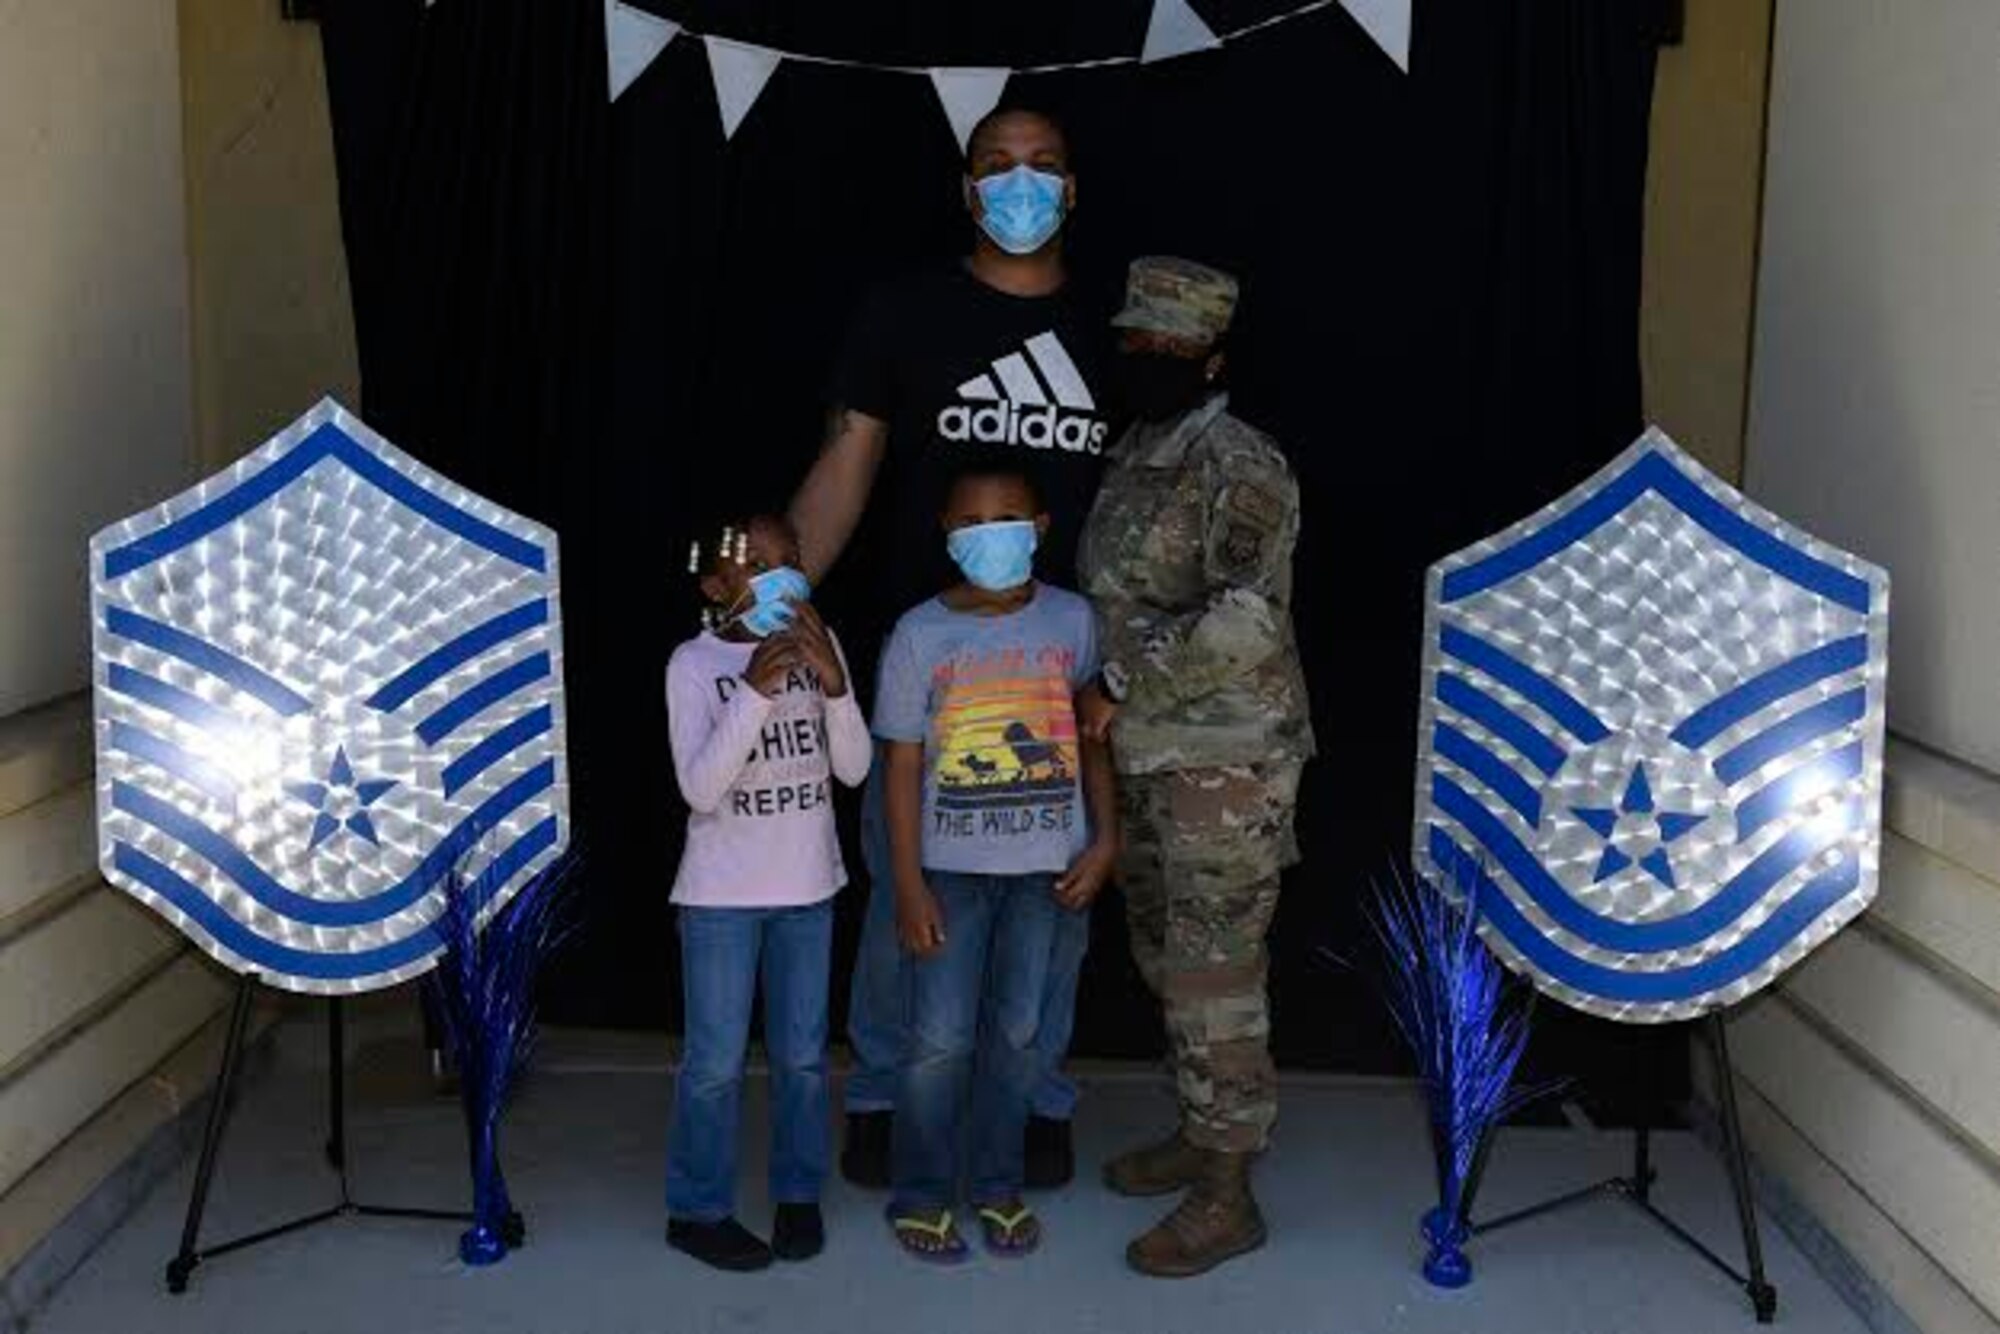 U.S. Air Force Tech. Sgt. Kila Archer, 621st Contingency Response Wing logistics planner, poses for a photo with her family during a master sergeant release celebration July 23, 2020, at Travis Air Force Base, California. The event coordinators created a photo booth for master sergeant selects and their families to take photos. (U.S. Air Force photo by Airman 1st Class Cameron Otte)